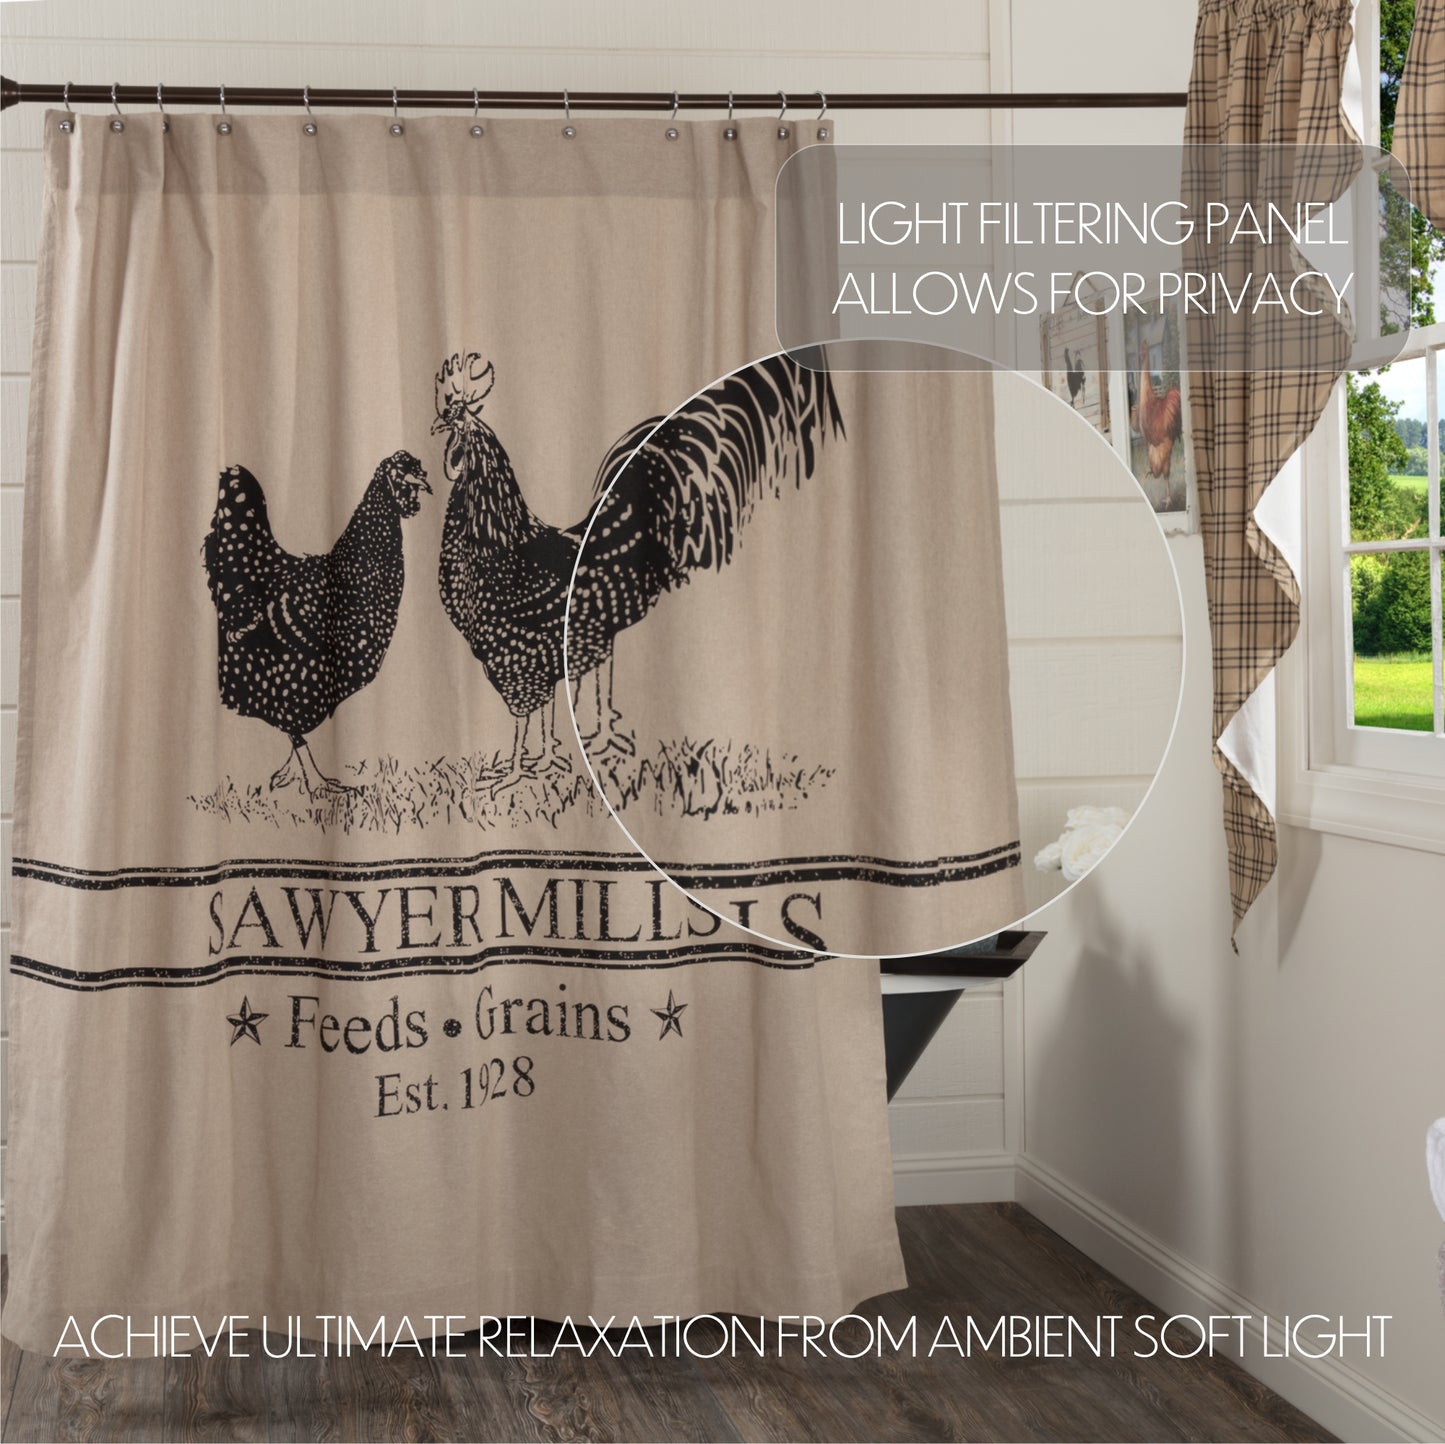 45802-Sawyer-Mill-Charcoal-Poultry-Shower-Curtain-72x72-image-2